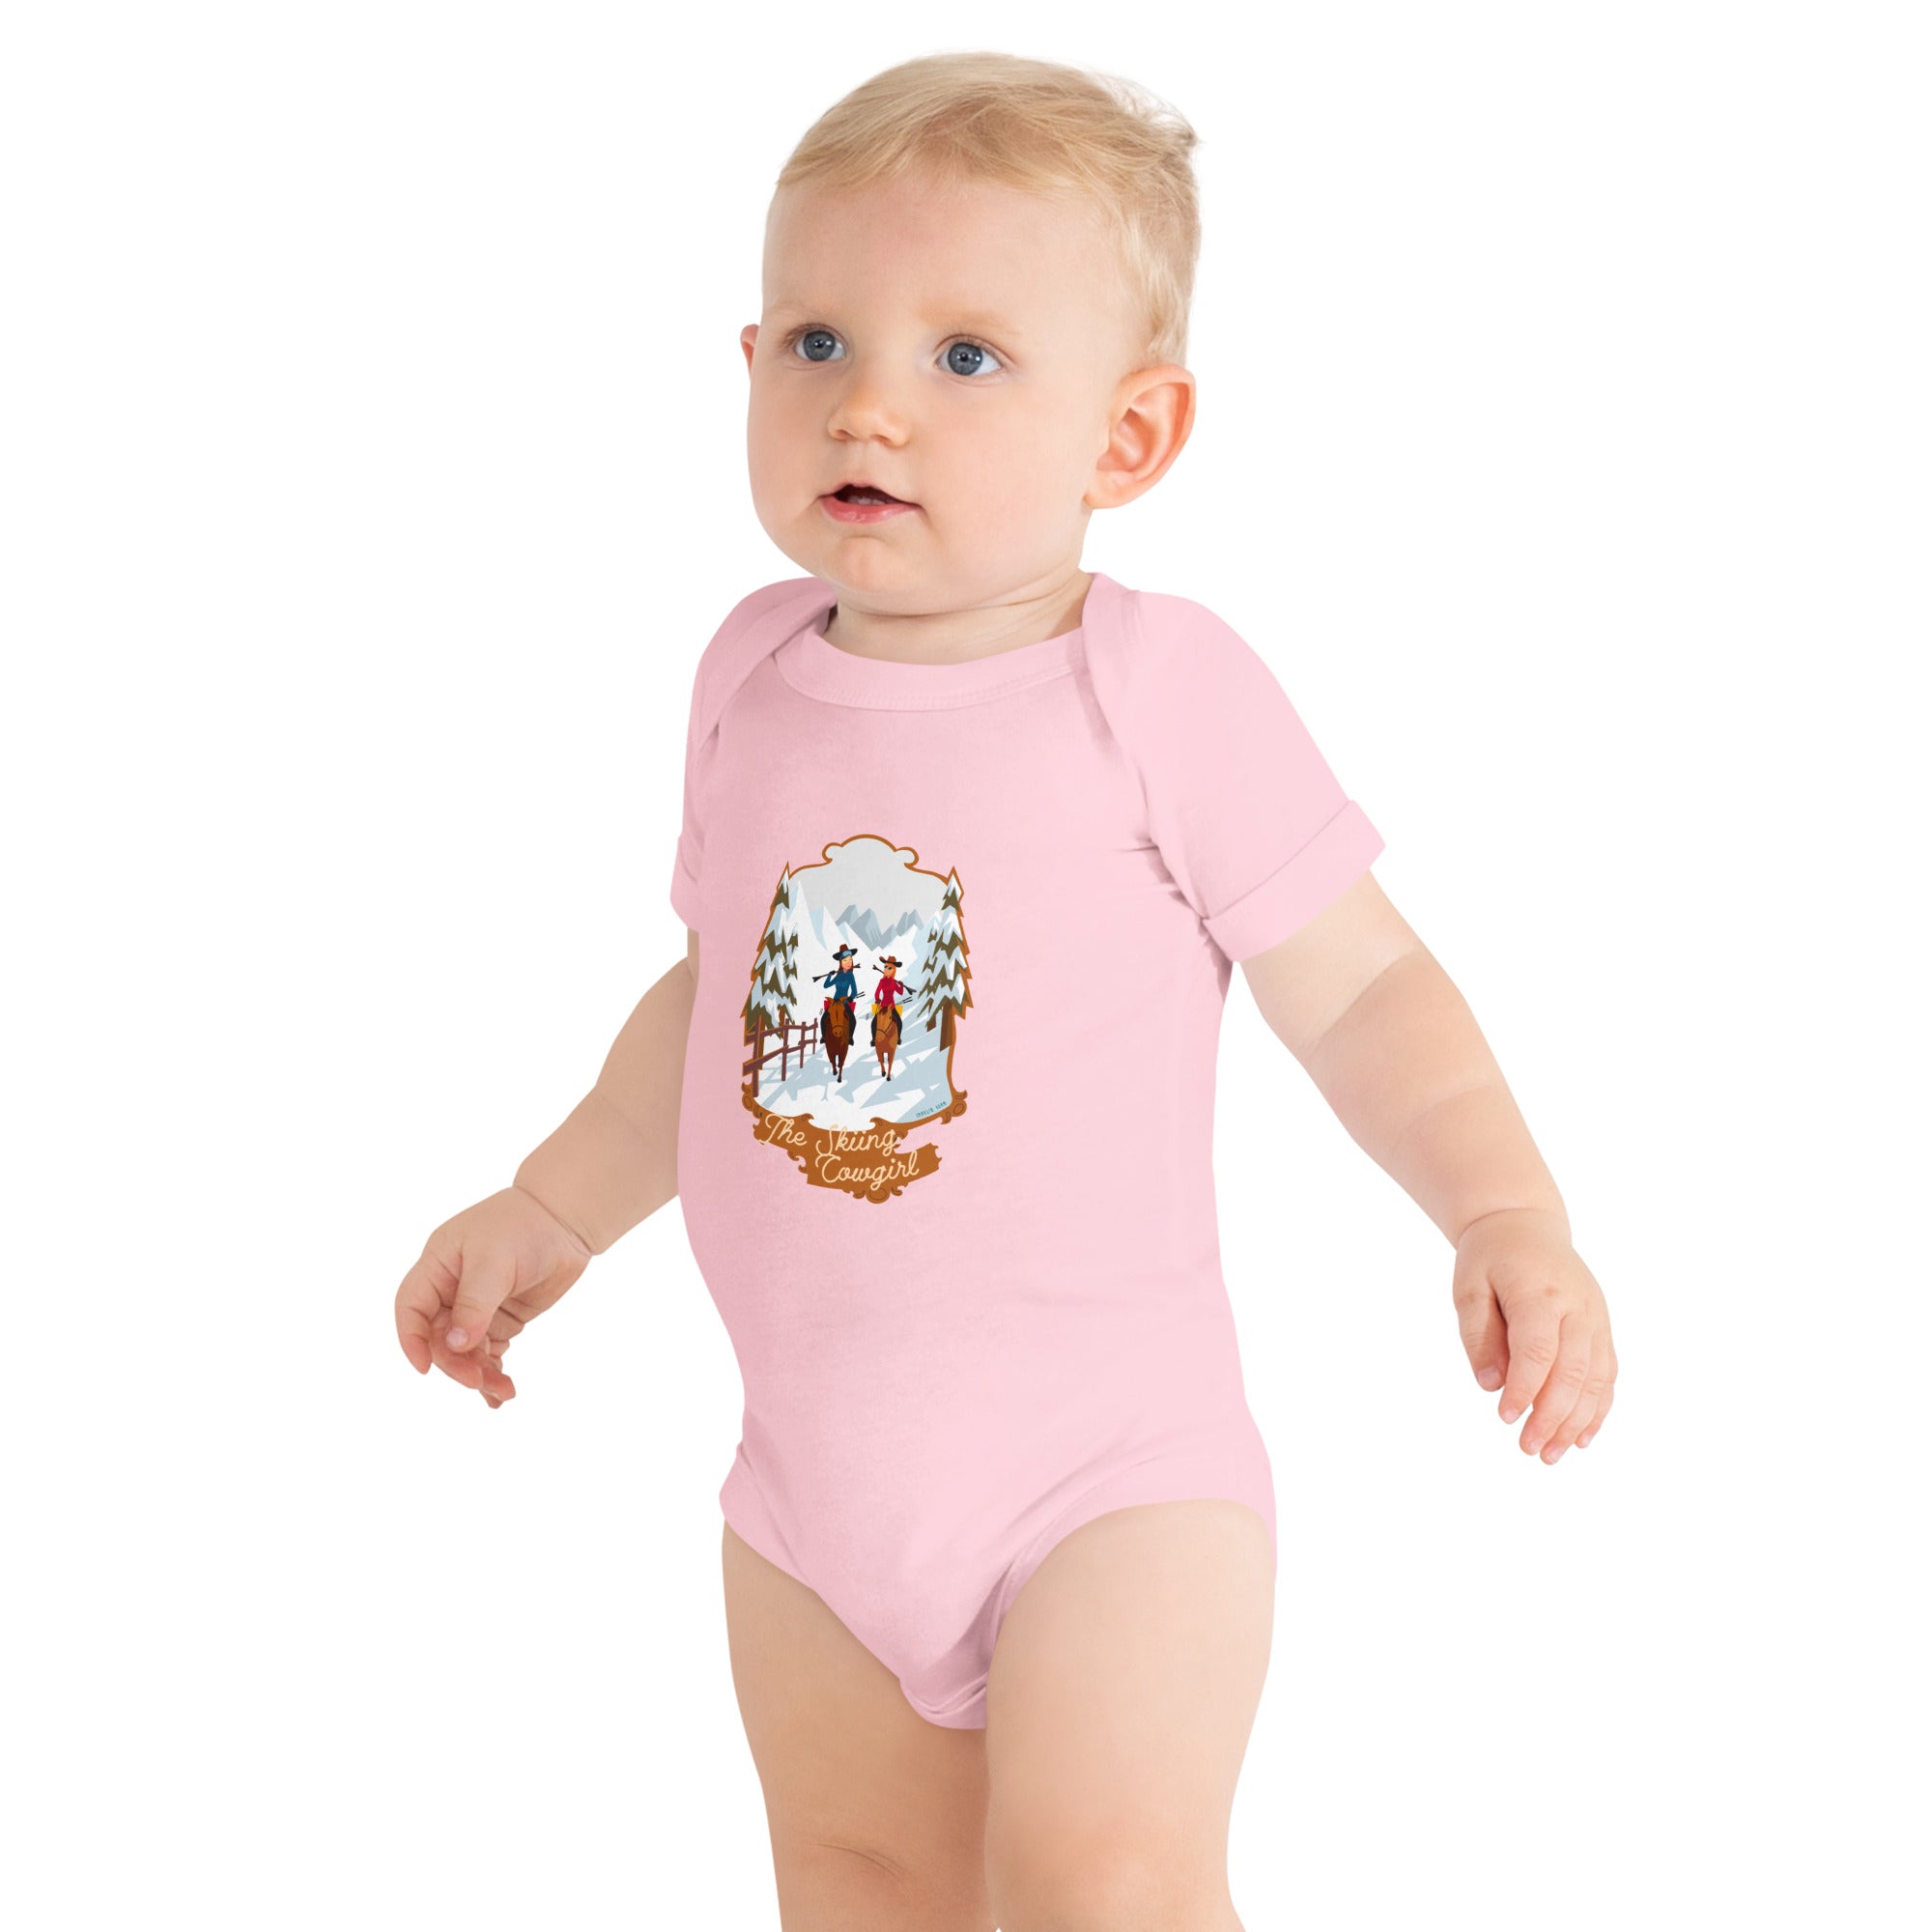 Baby short sleeve one piece The Skiing Cowgirl